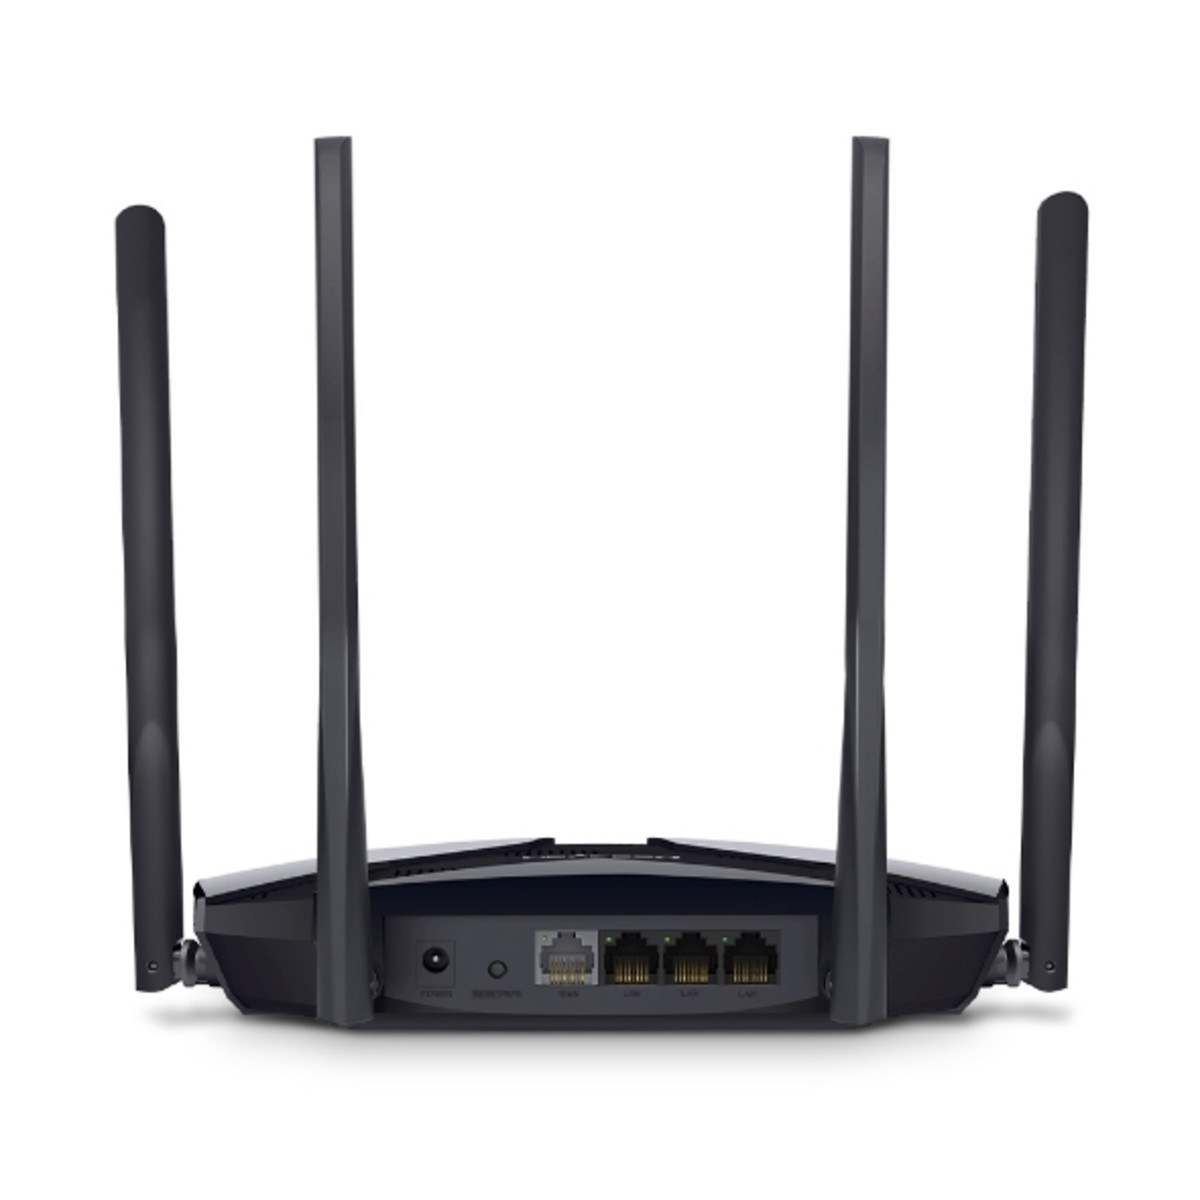 MR80X AX3000 Dual-Band Wi-Fi 6 Router